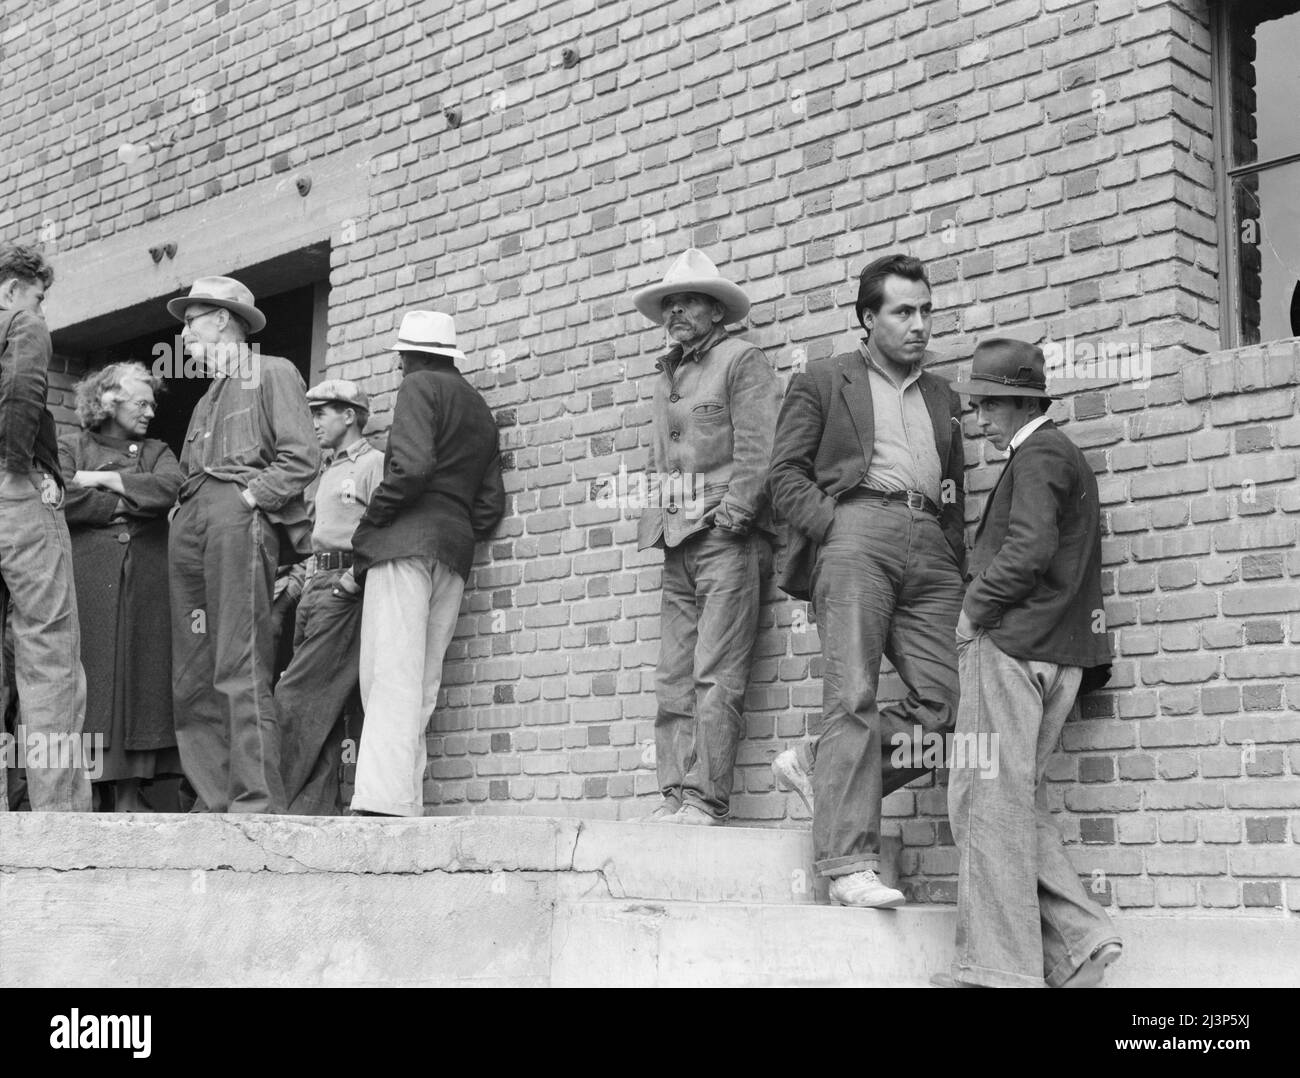 Mexicans, field laborers, on strike in cotton picking season, apply to Farm Security Administration (FSA) for relief. Bakersfield, California. Stock Photo